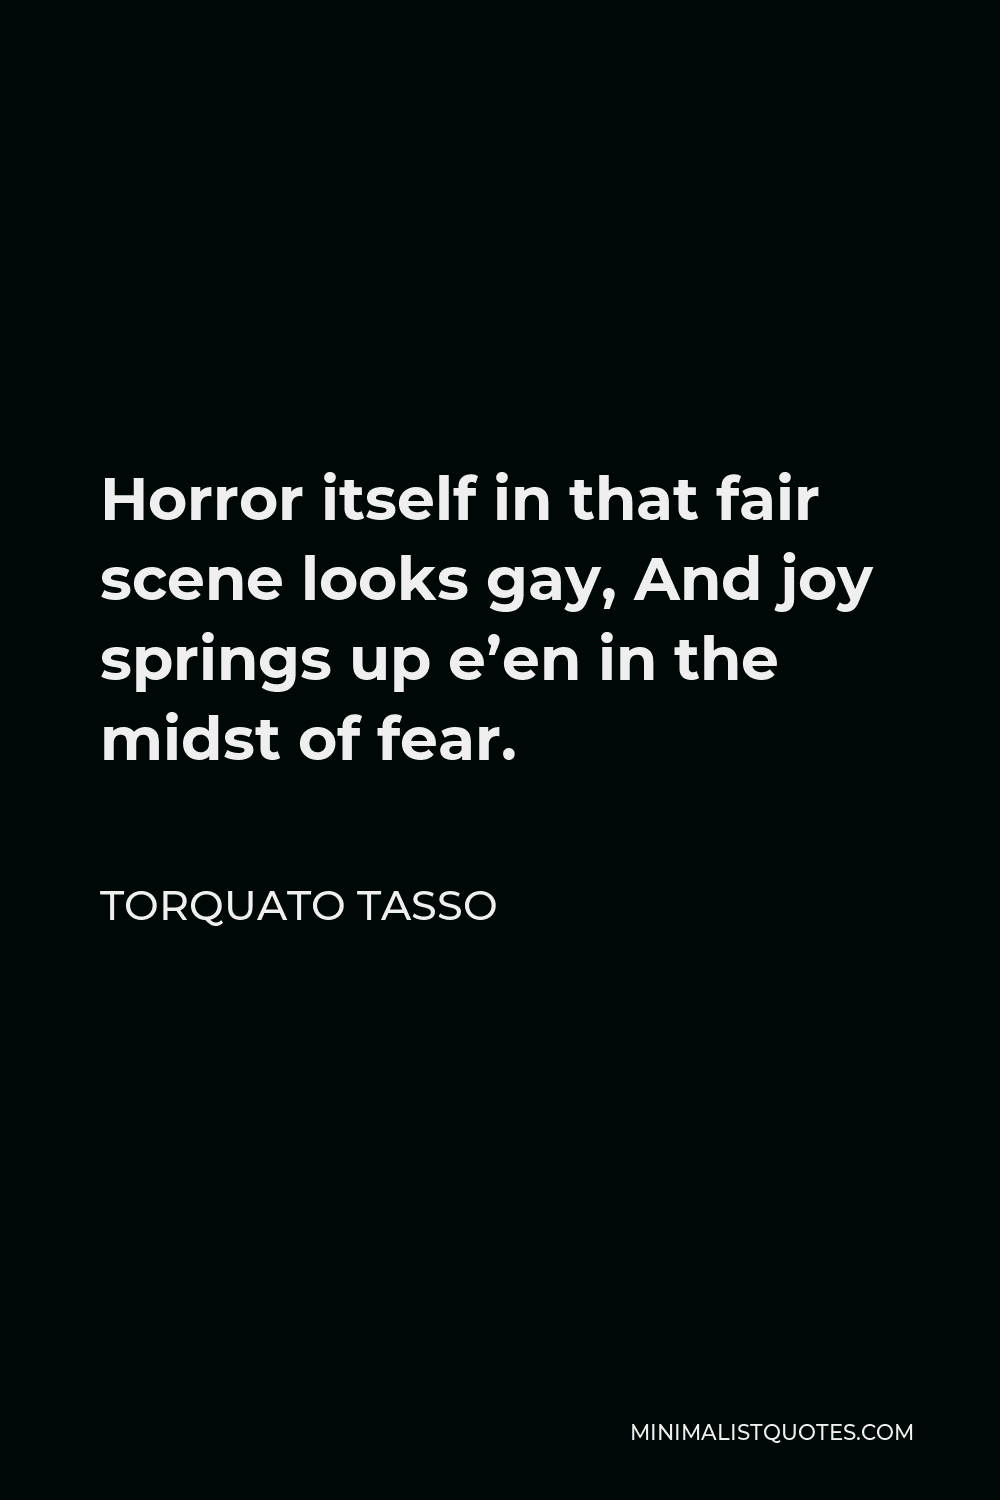 Torquato Tasso Quote - Horror itself in that fair scene looks gay, And joy springs up e’en in the midst of fear.